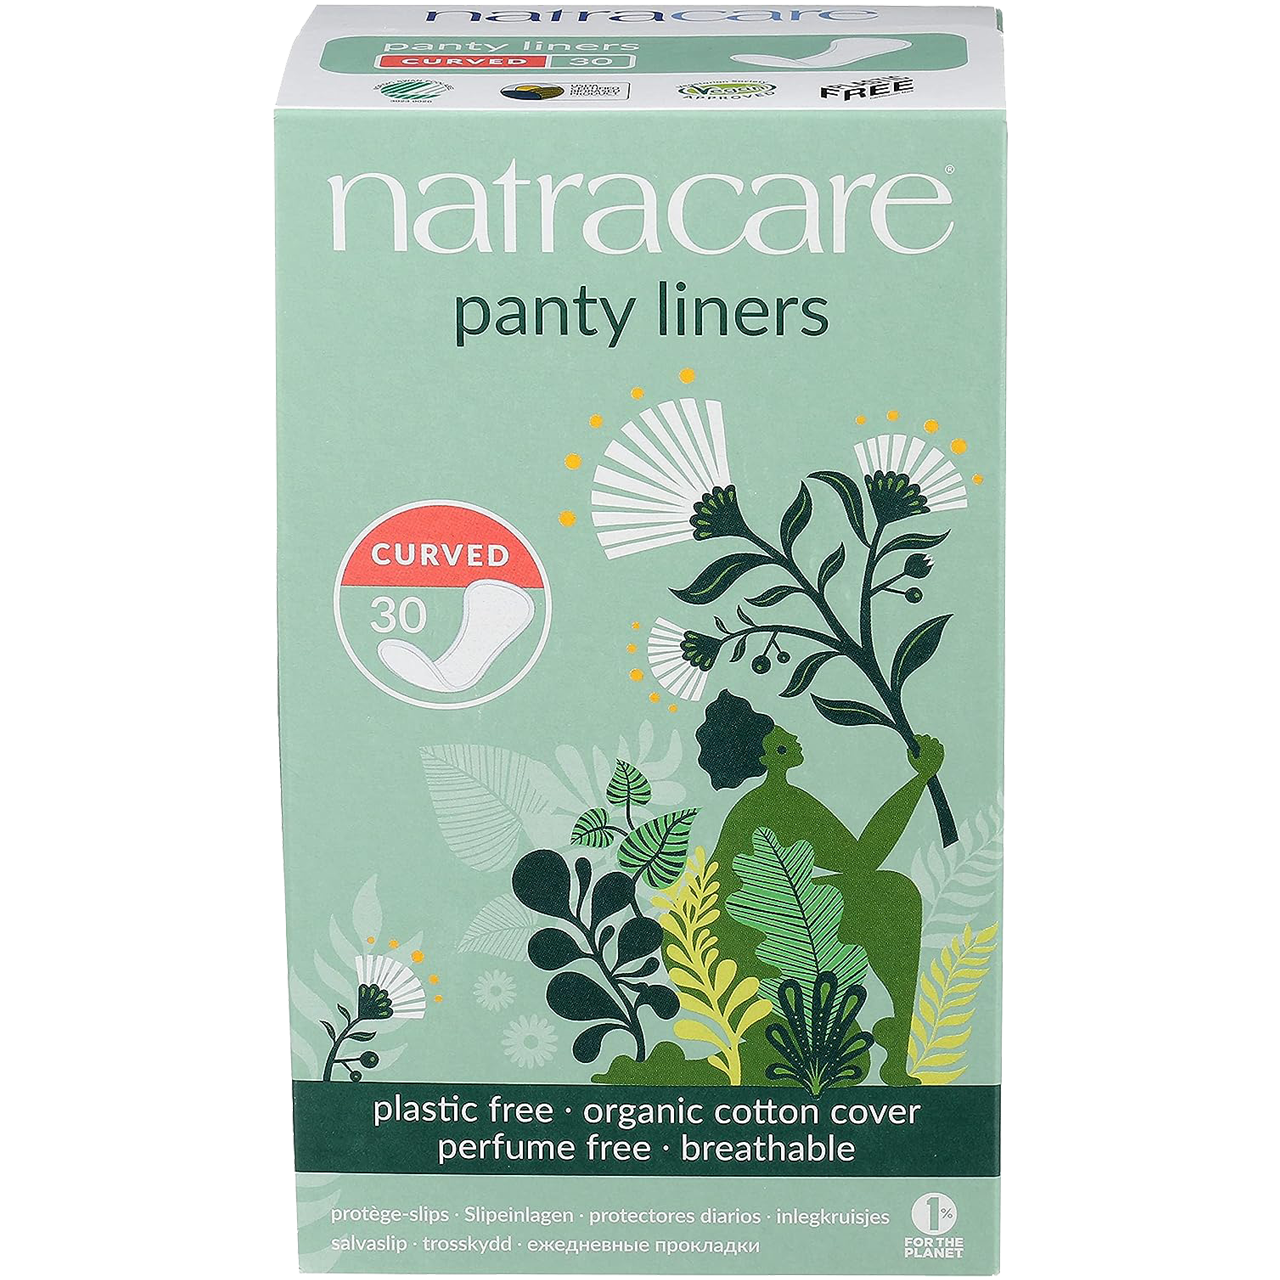 Natracare Panty Liners Curved Organic Cotton Cover